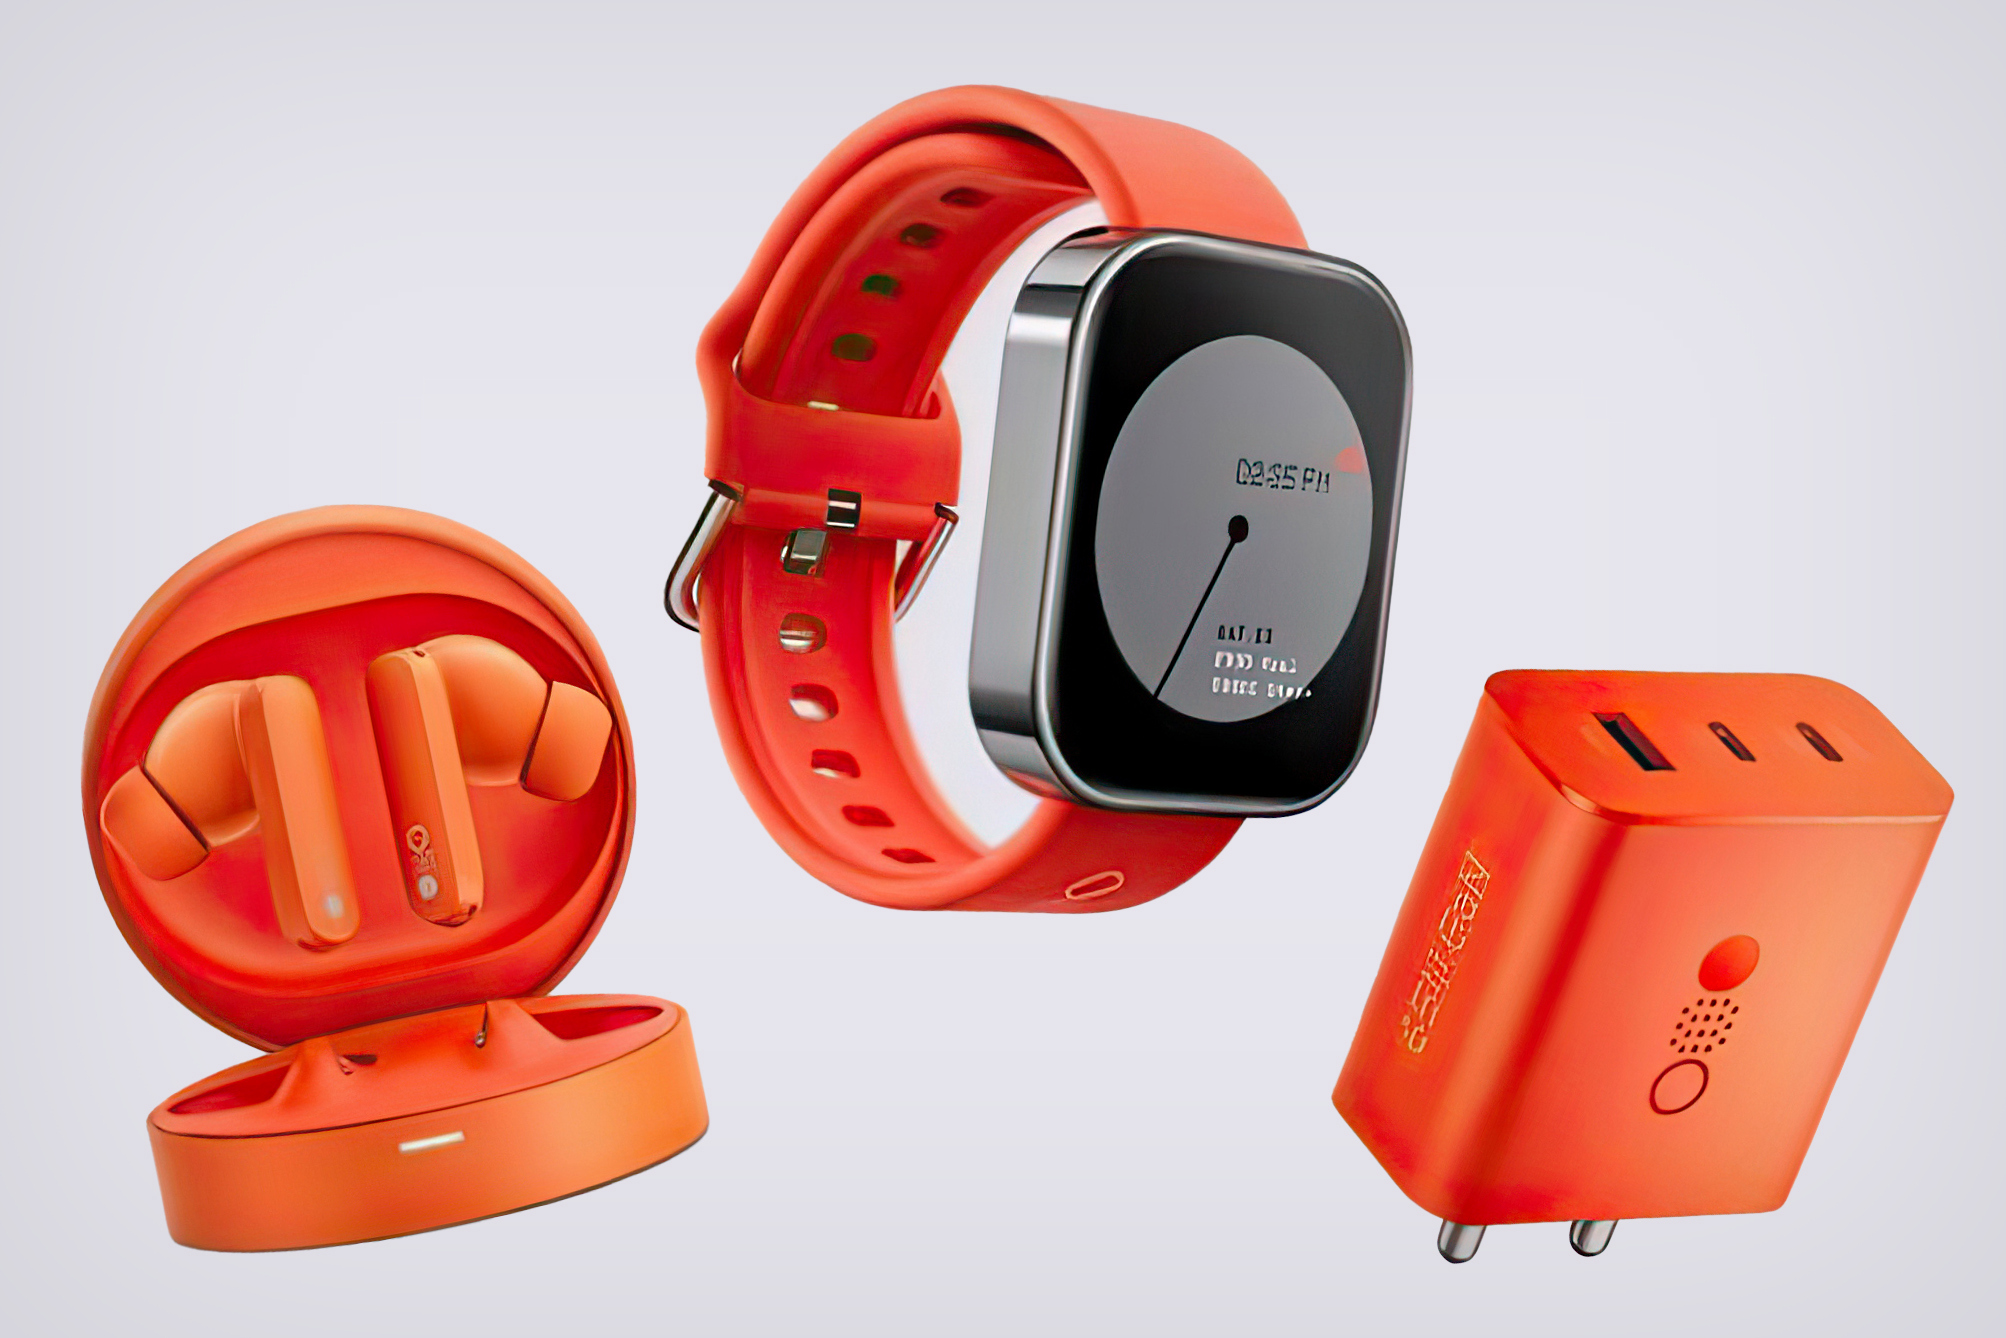 BREAKING: Carl Pei's Latest Brand “CMF” is launching a Smartwatch, TWS  Earbuds, and GaN Charger - Yanko Design